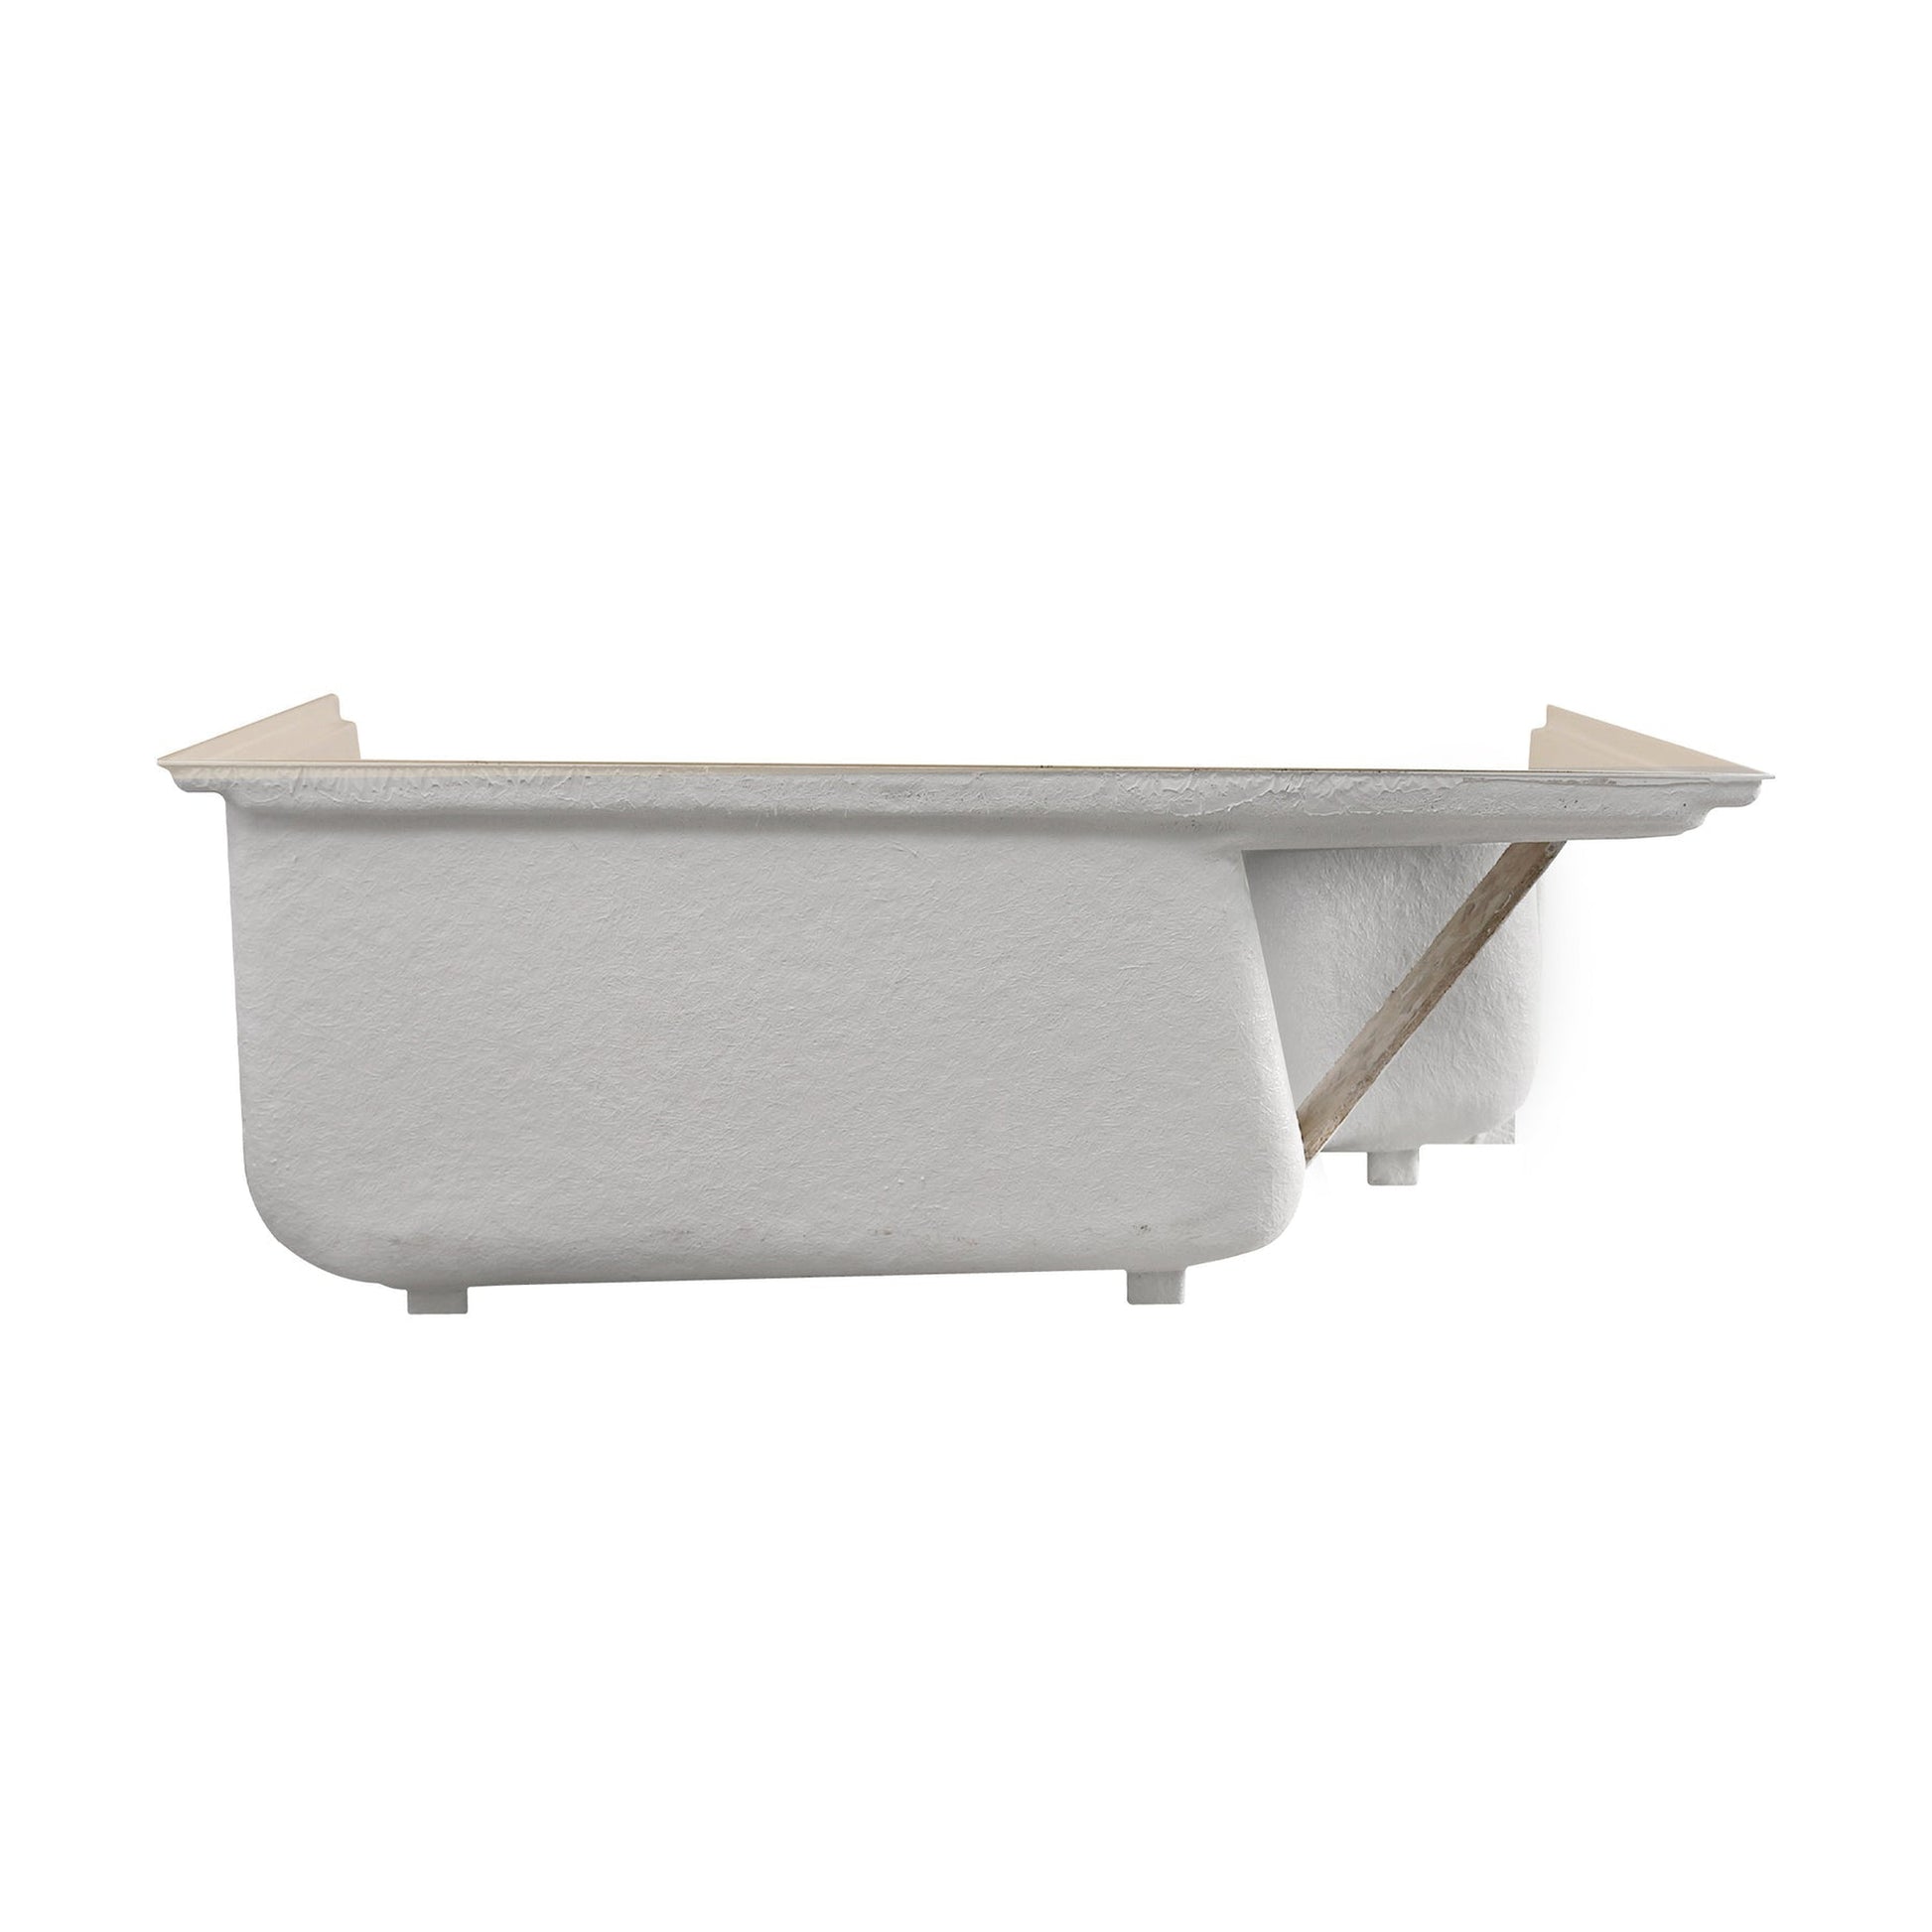 Swiss Madison Aquatique 60" x 32" Three-Wall Alcove Biscuit Right-Hand Drain Seated Shower Base With Built-In Integral Flange and Integrated Seat